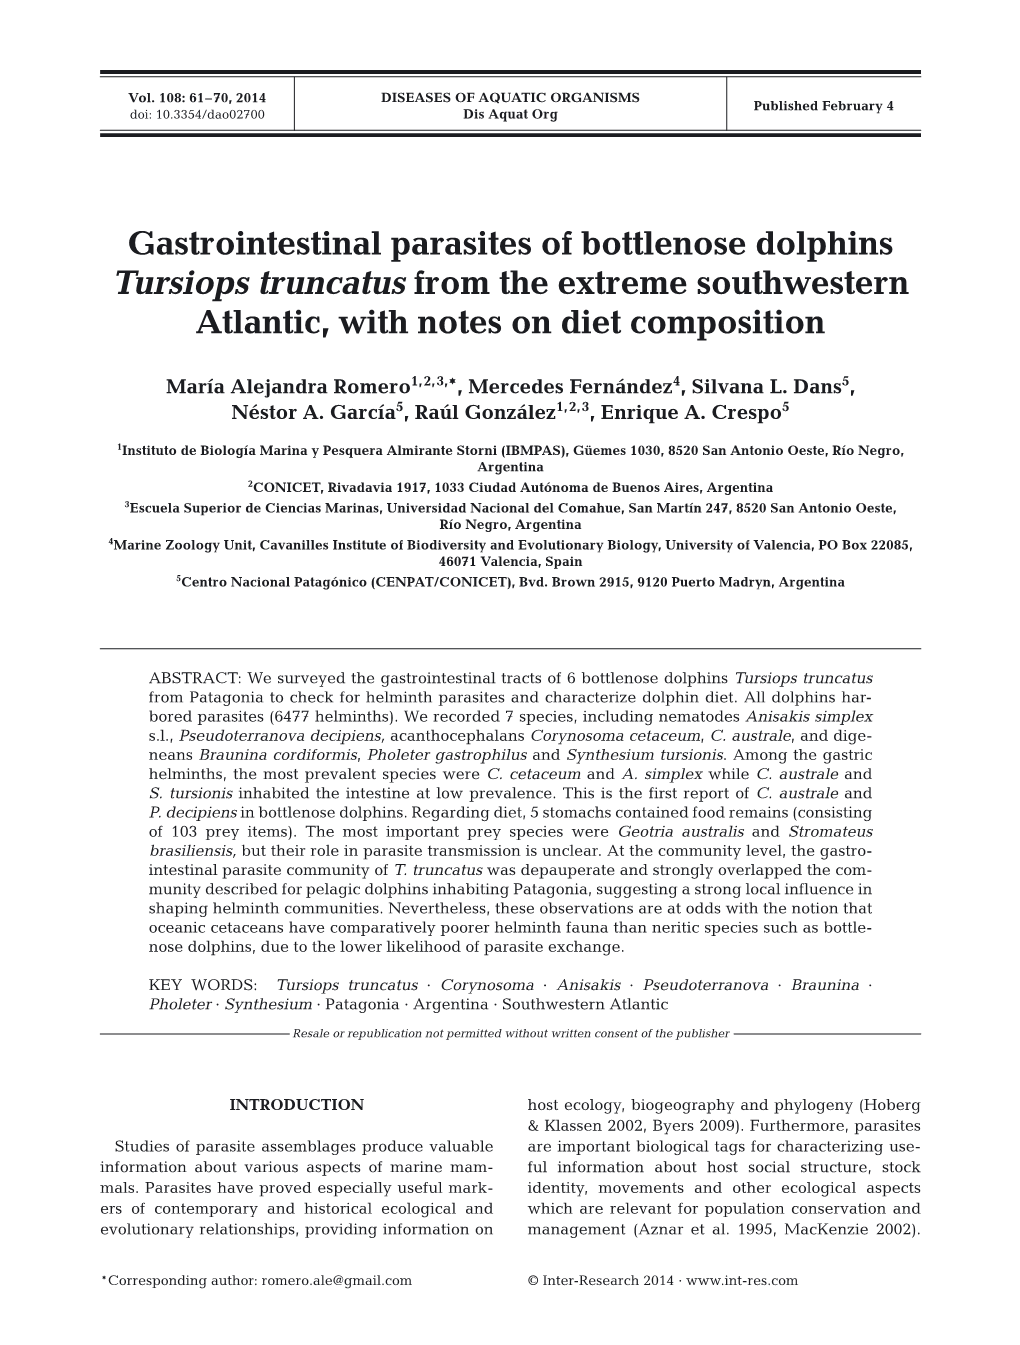 Gastrointestinal Parasites of Bottlenose Dolphins Tursiops Truncatus from the Extreme Southwestern Atlantic, with Notes on Diet Composition